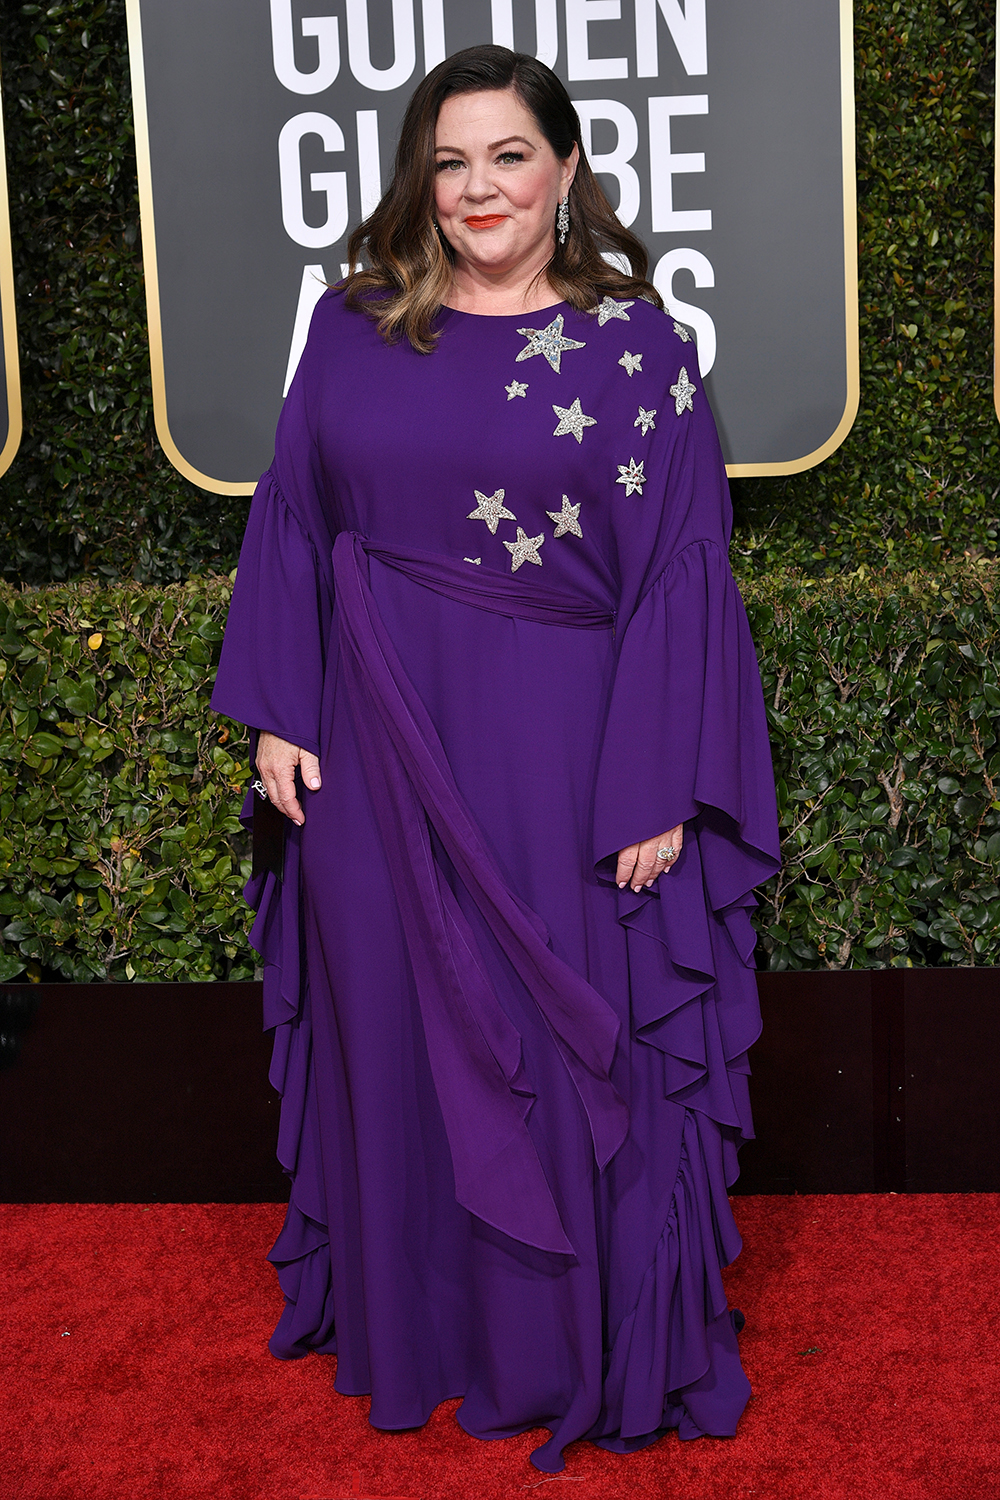 Mandatory Credit: Photo by Rob Latour/REX/Shutterstock (10048066jh) Melissa McCarthy 76th Annual Golden Globe Awards, Arrivals, Los Angeles, USA - 06 Jan 2019